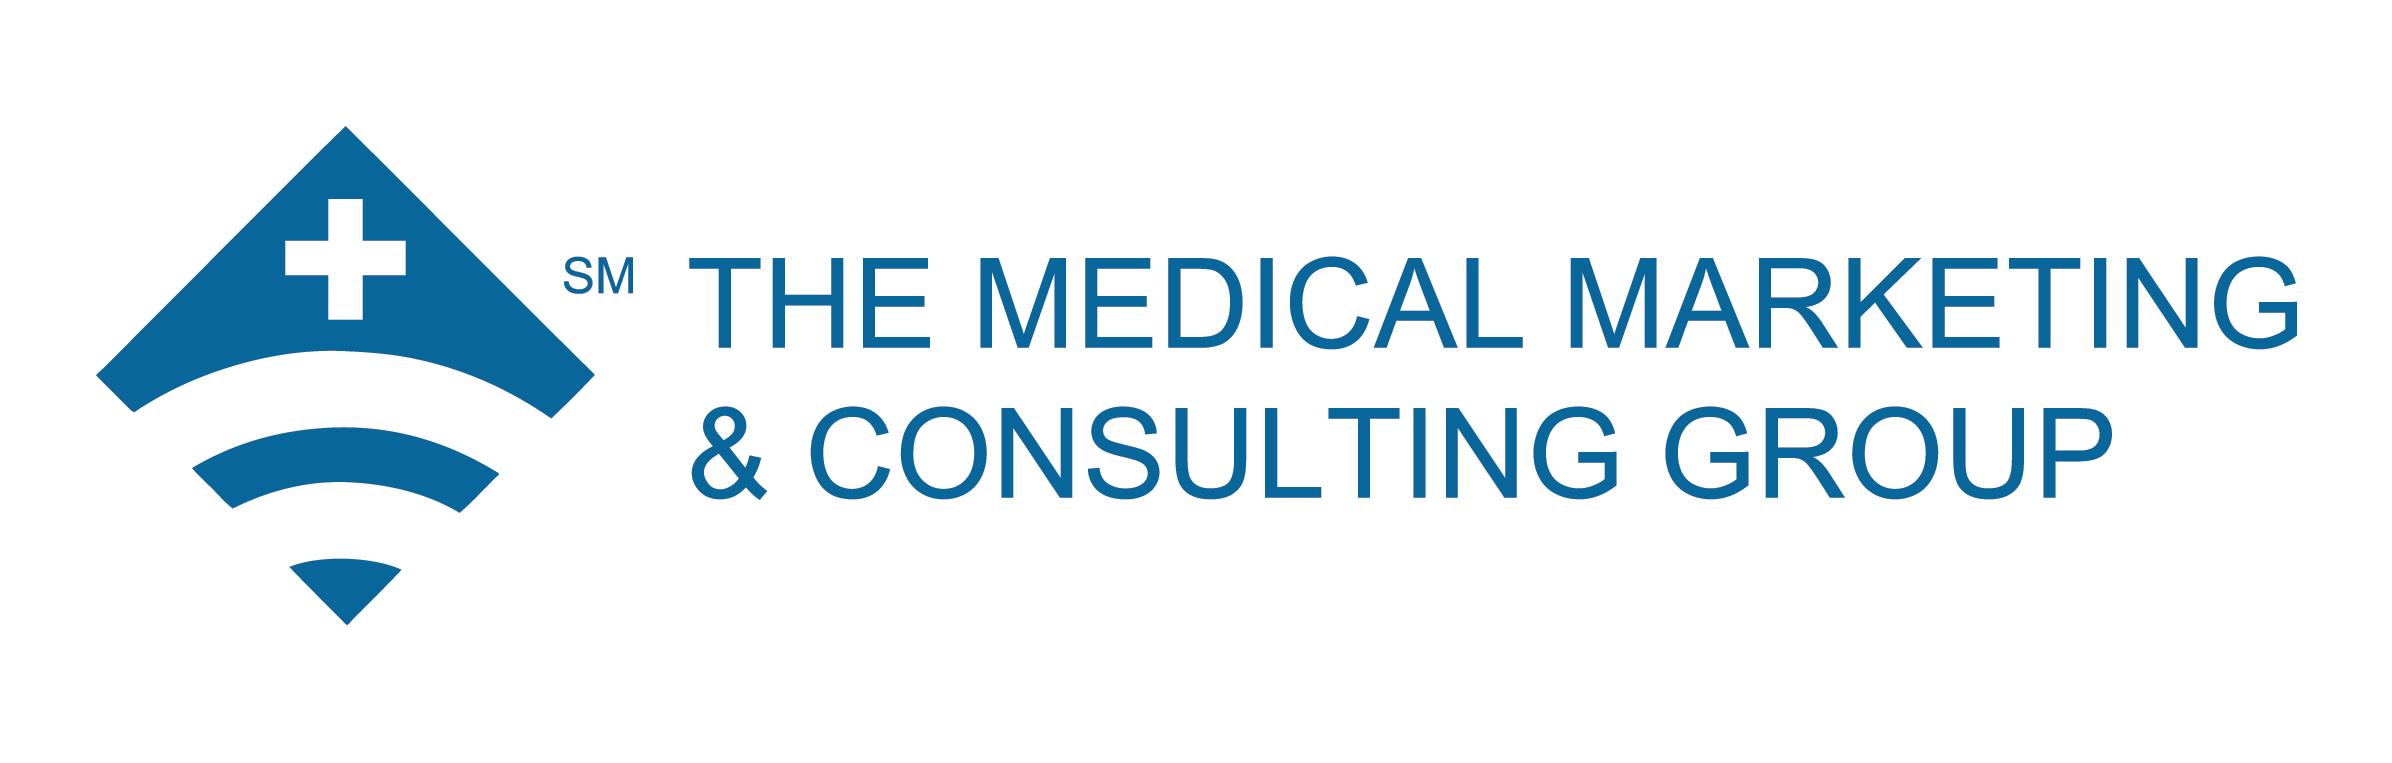 The Medical Marketing & Consulting Group